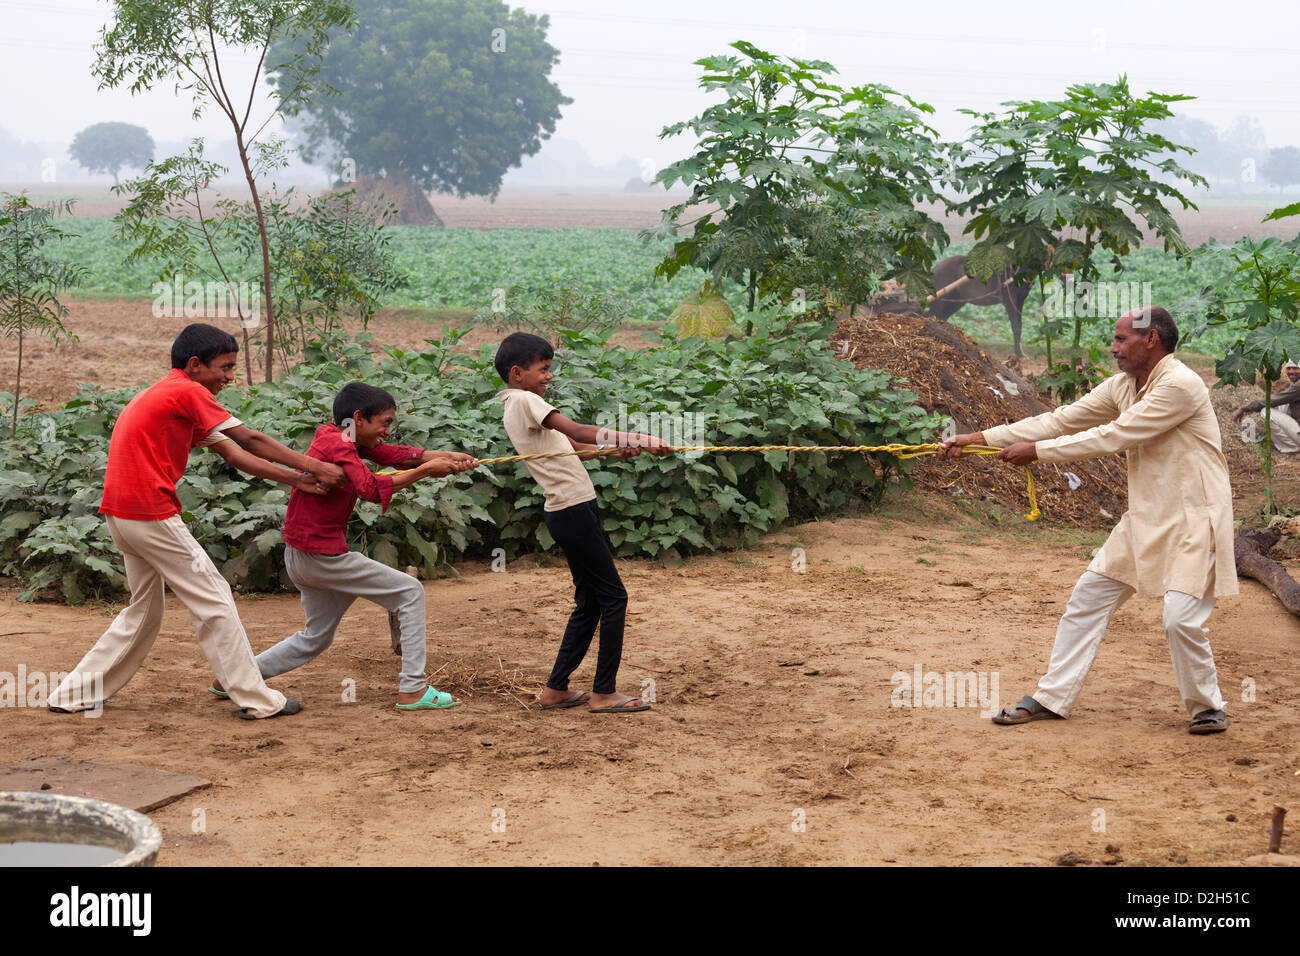 india, Uttar Pradesh, middle-aged farmer playing tug of war with his three children Stock Photo